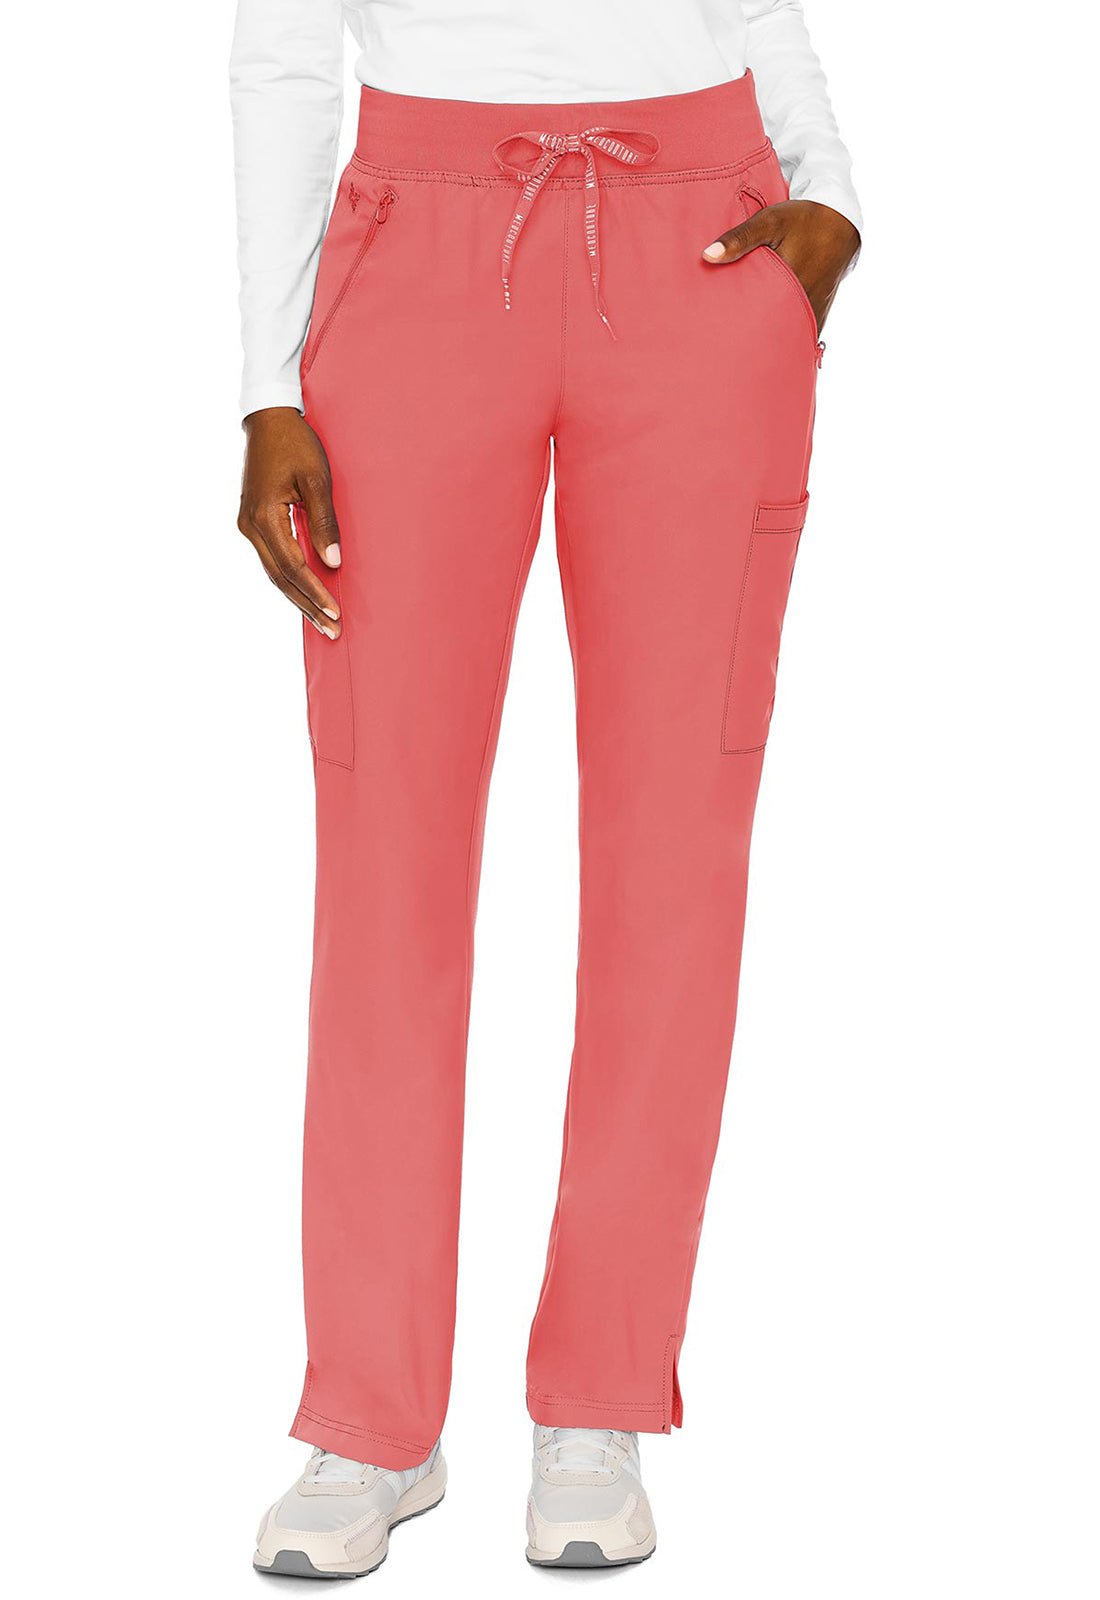 Med Couture Insight Drawstring Scrub Pant MC2702 in Coral, Grape